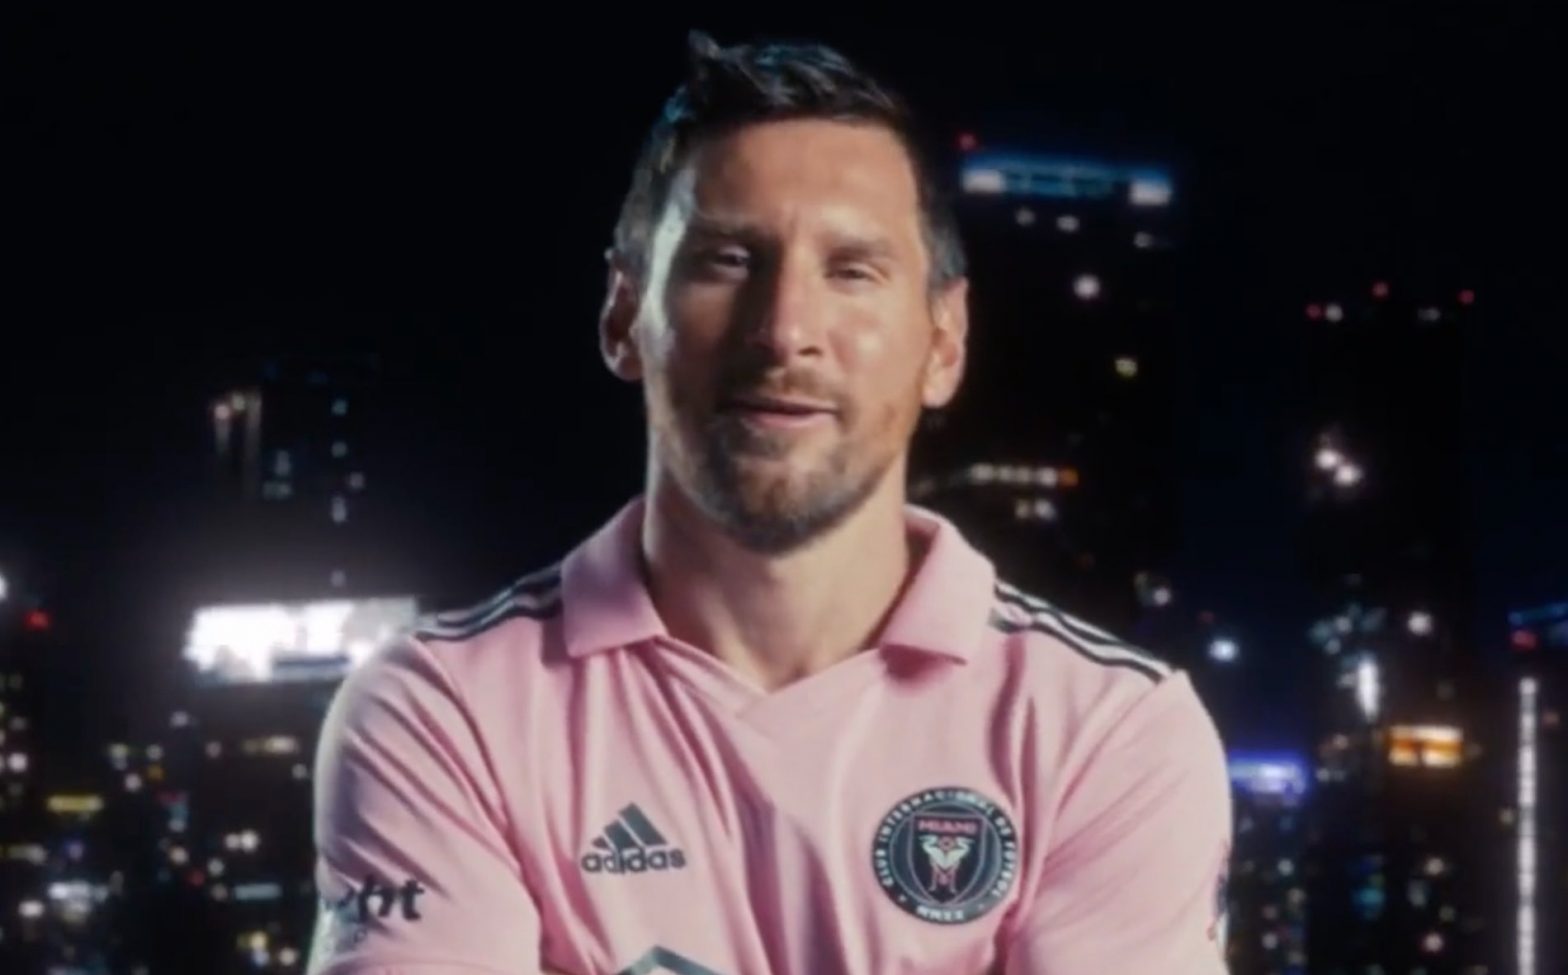 Lionel Messi unveiled by Inter Miami and Major League Soccer